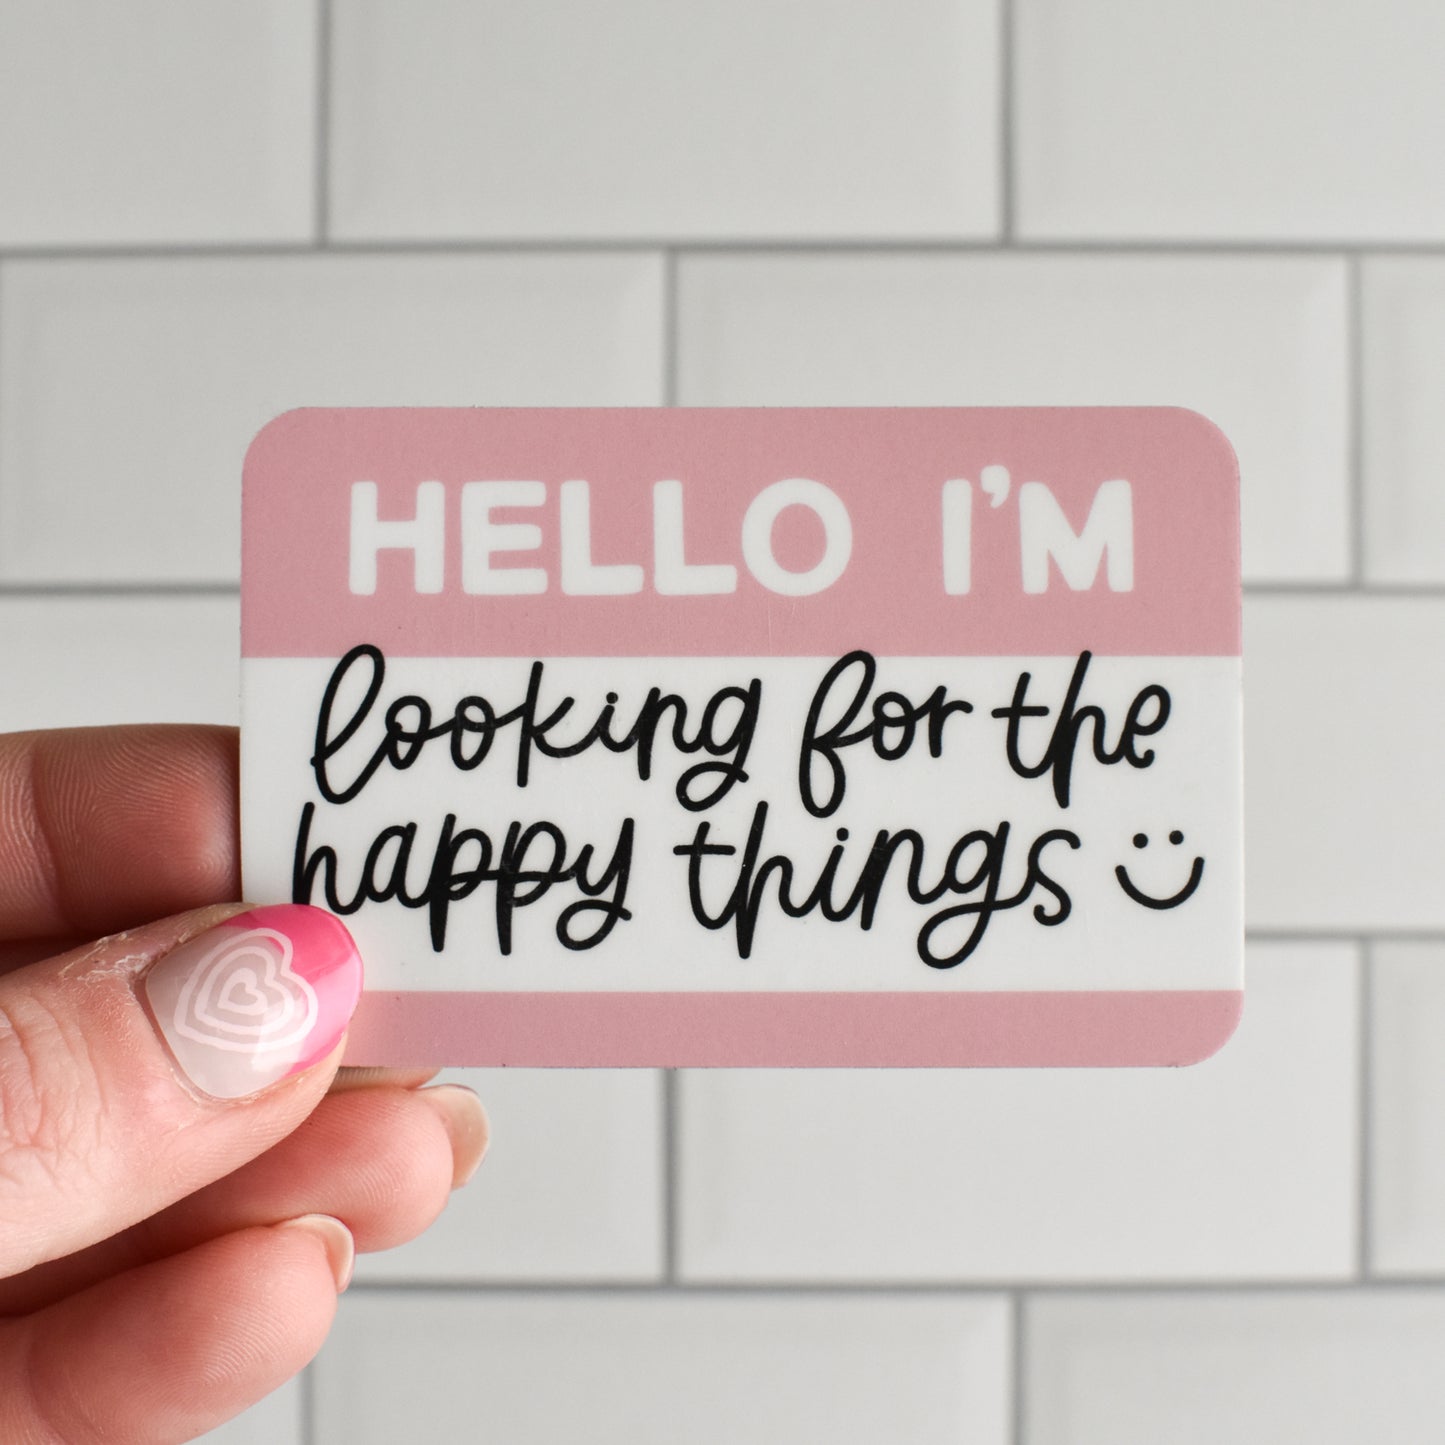 Hello / Happy Things Magnet